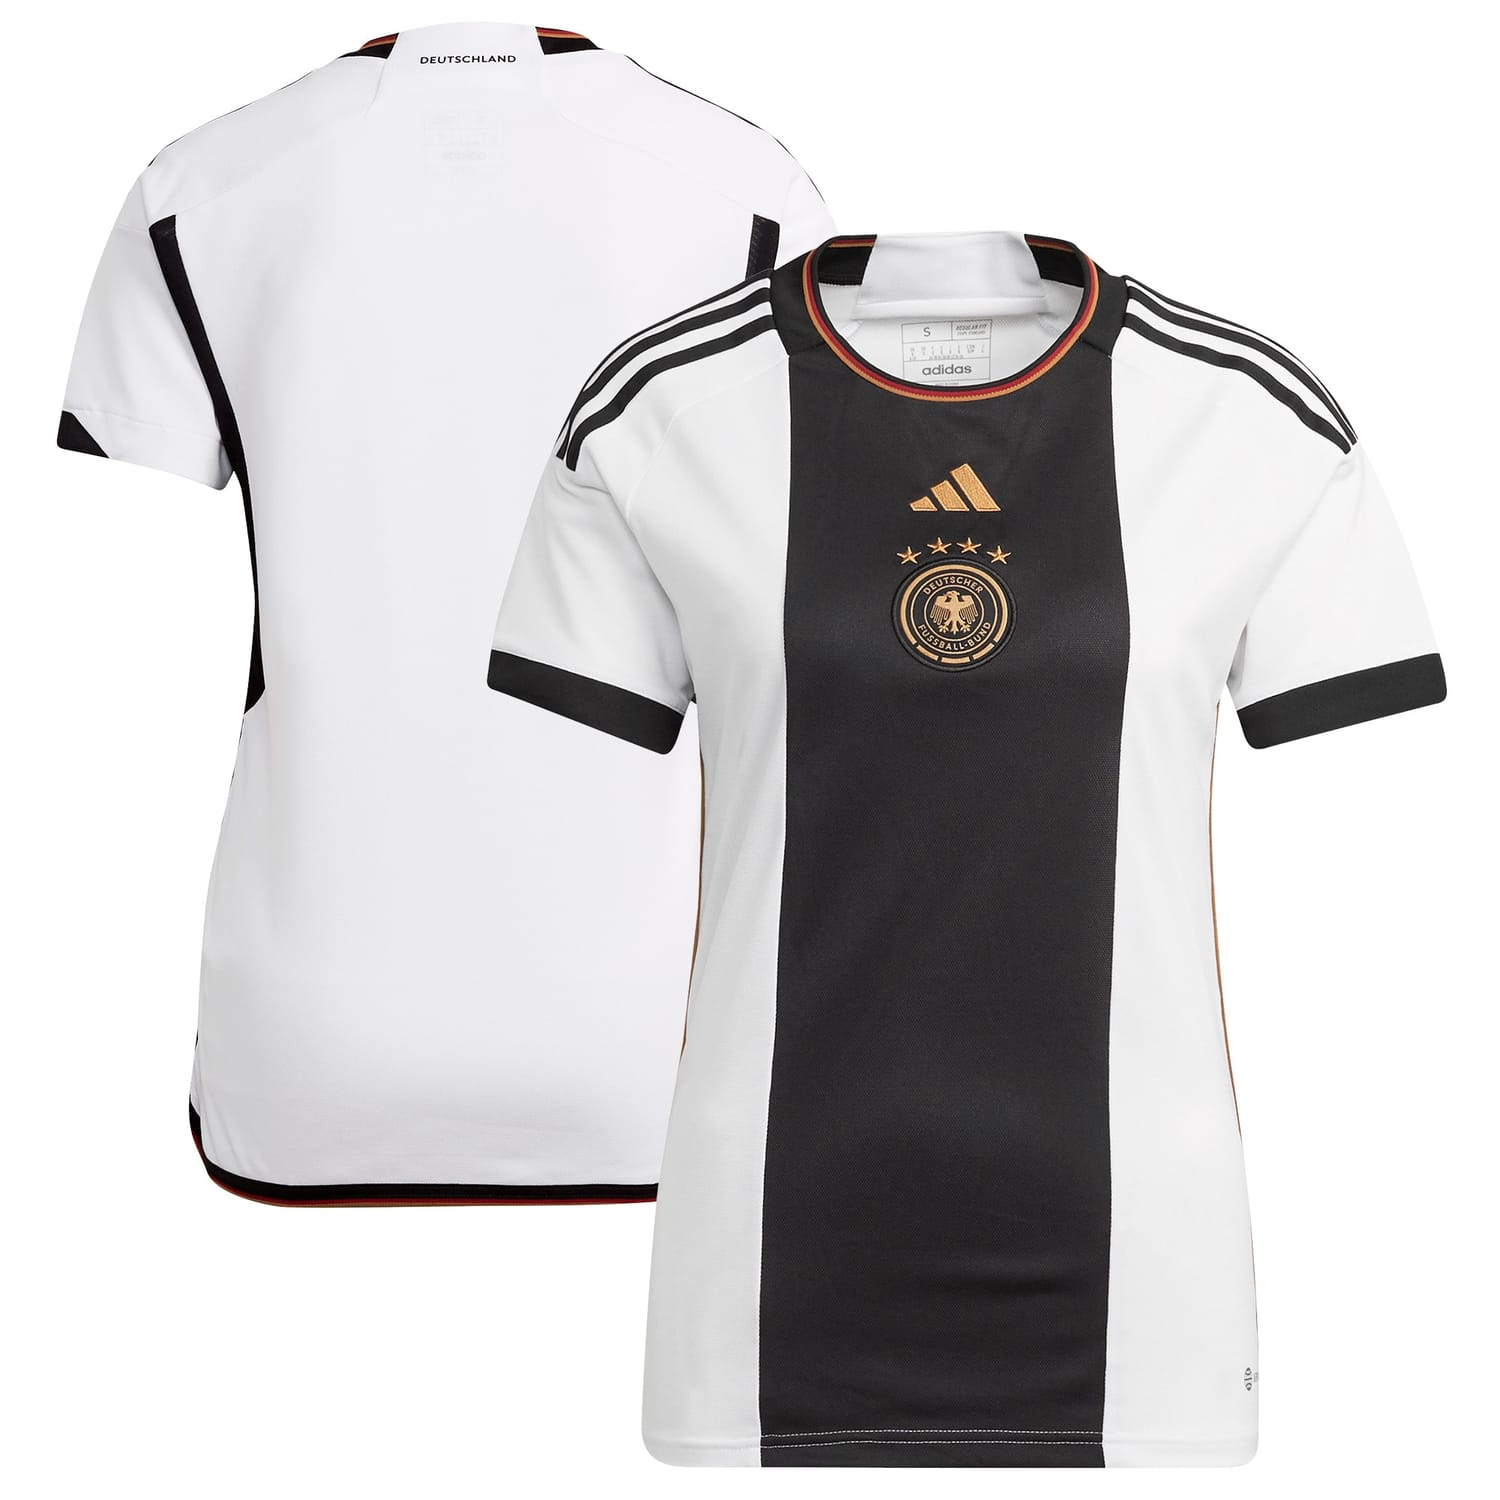 Germany National Team Home Jersey Shirt 2022 player 4 Stars printing for Women